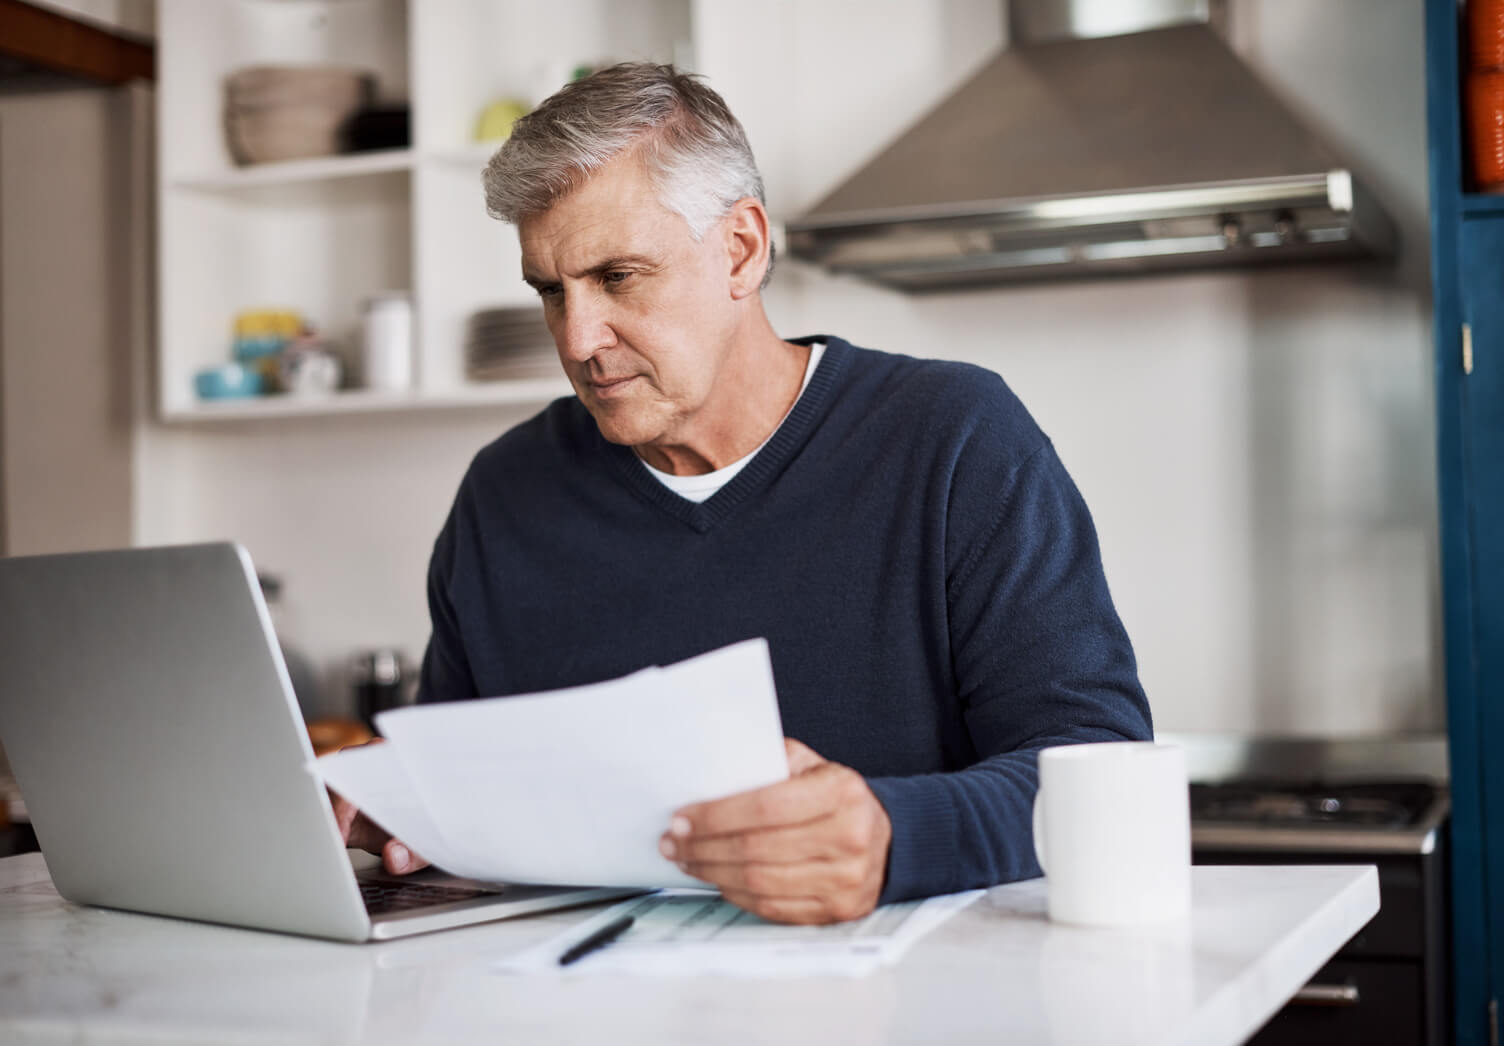 Mature man checking paperwork with a laptop